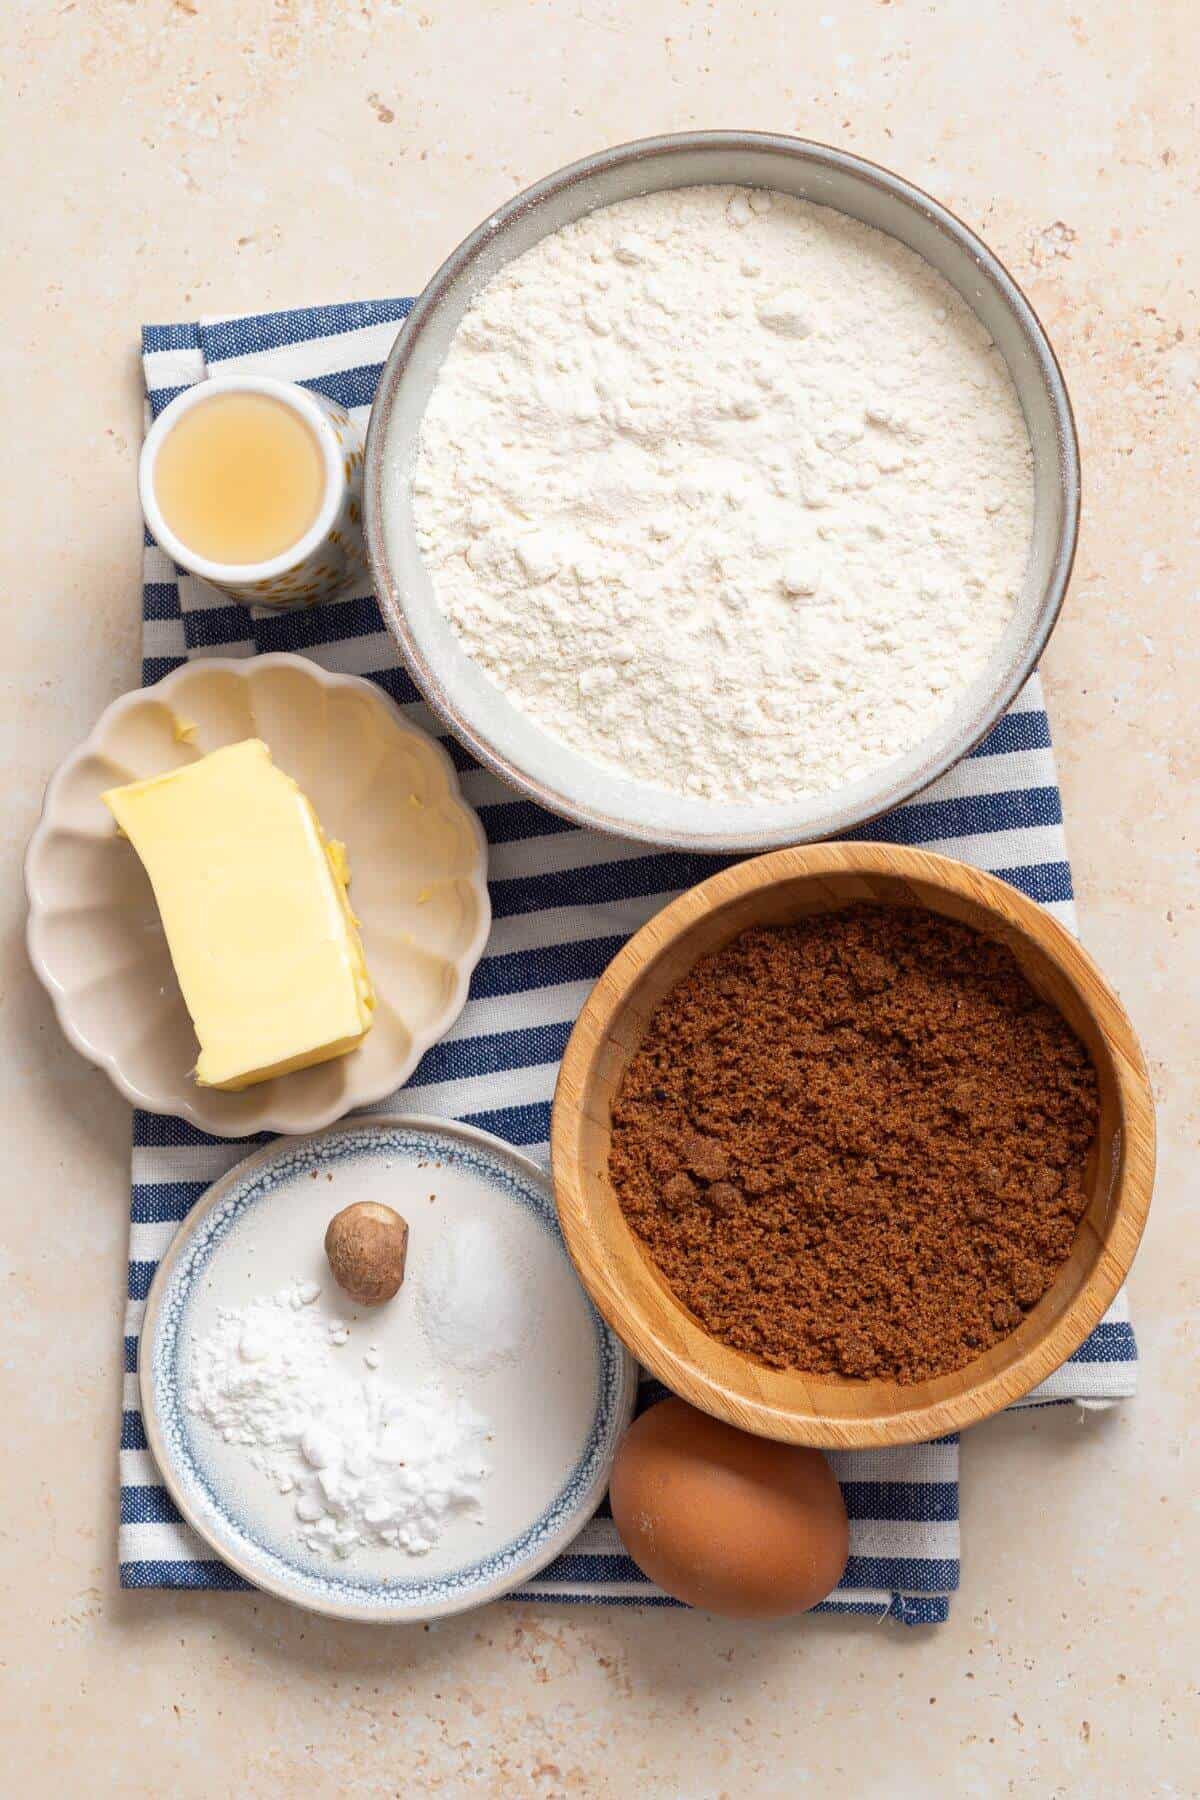 A bowl of flour, eggs, brown sugar and other ingredients on a table.